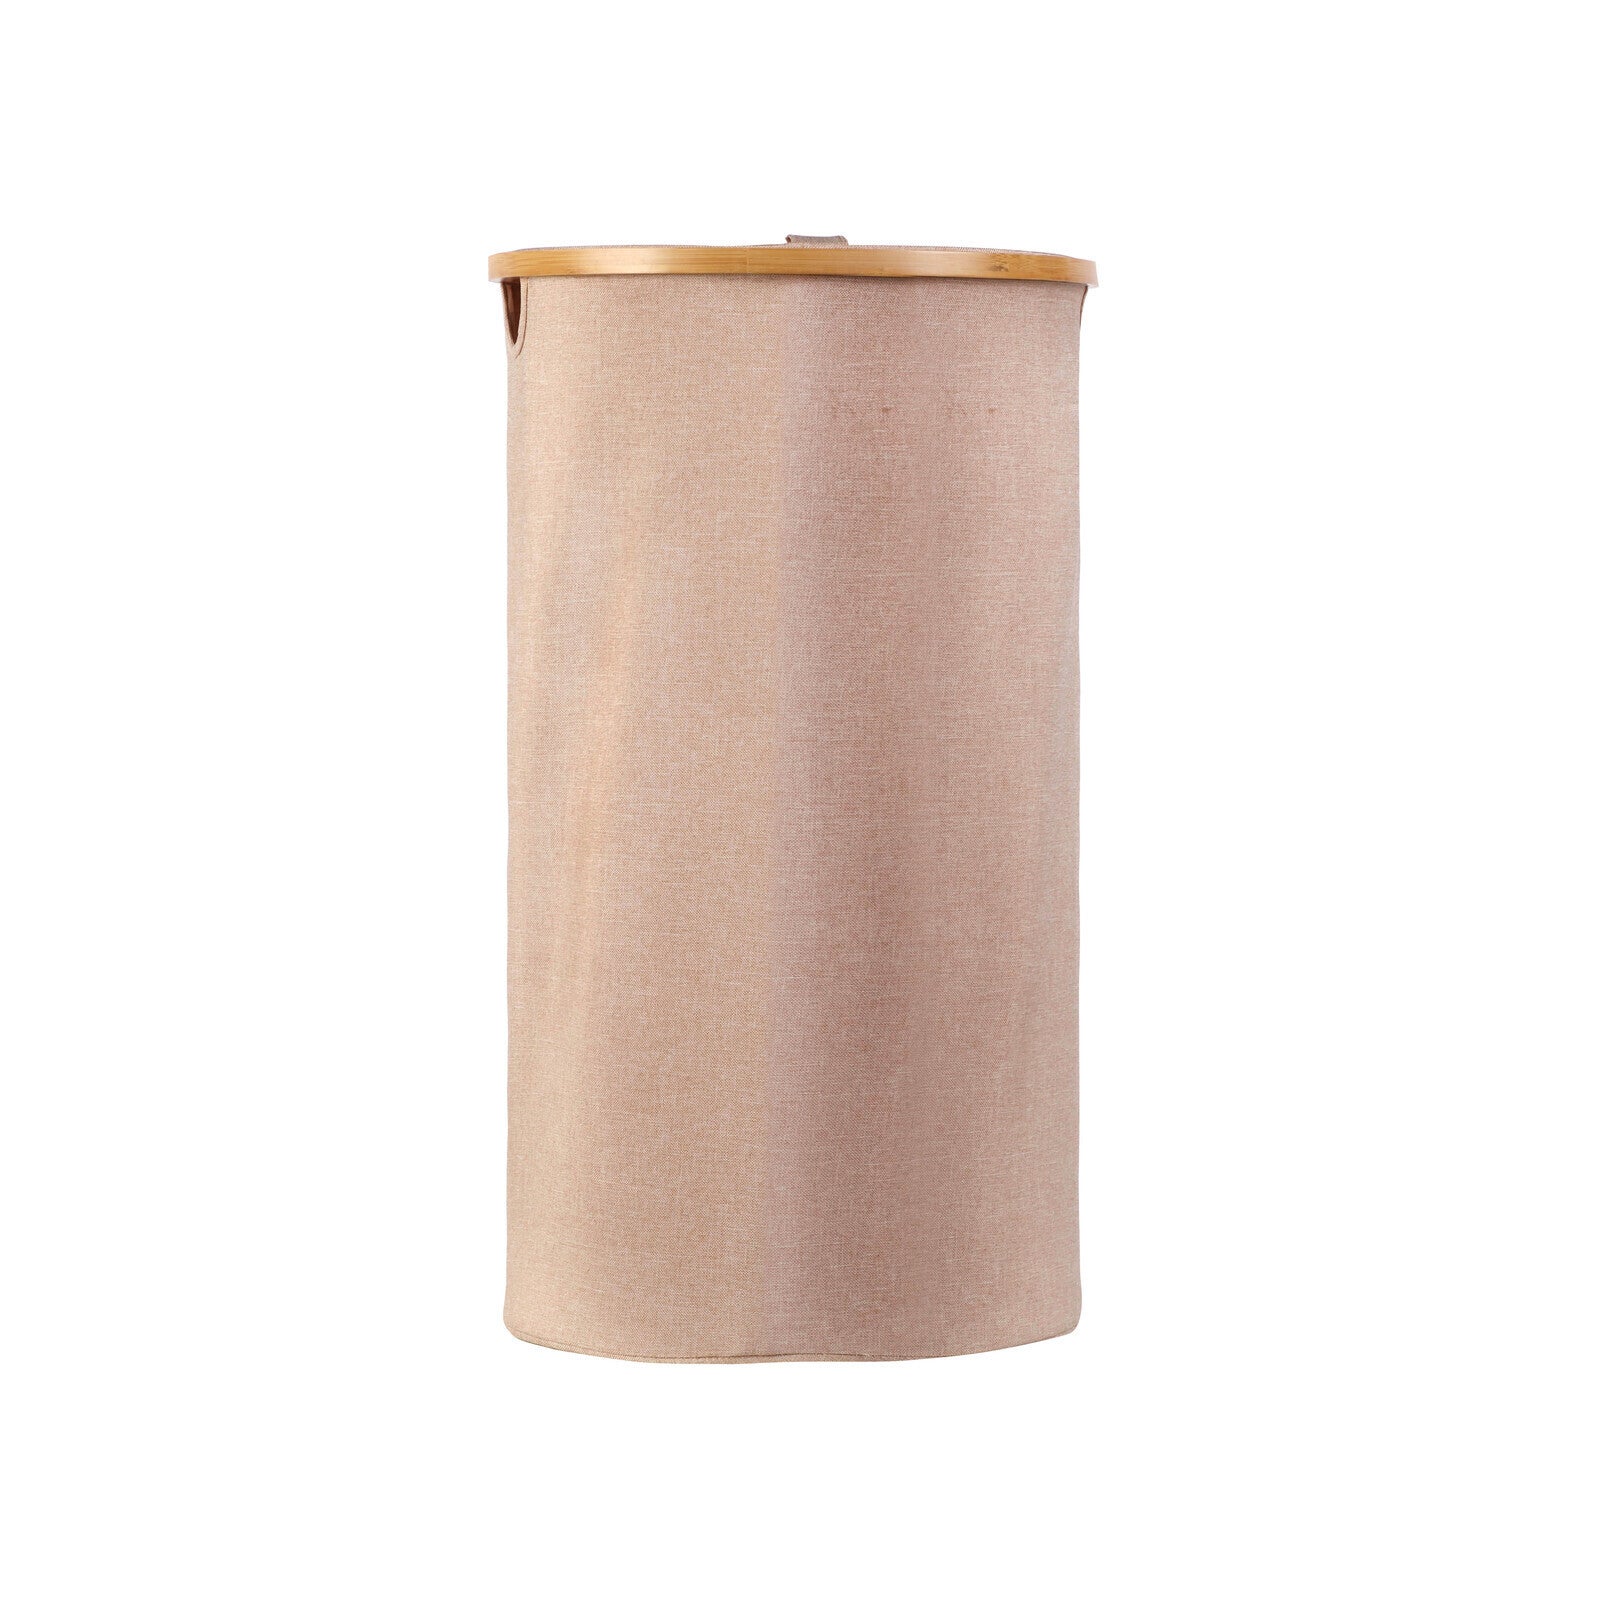 Sherwood Home Tall Round Linen and Bamboo Laundry Hamper with Cover Rose Gold 38x38x67cm